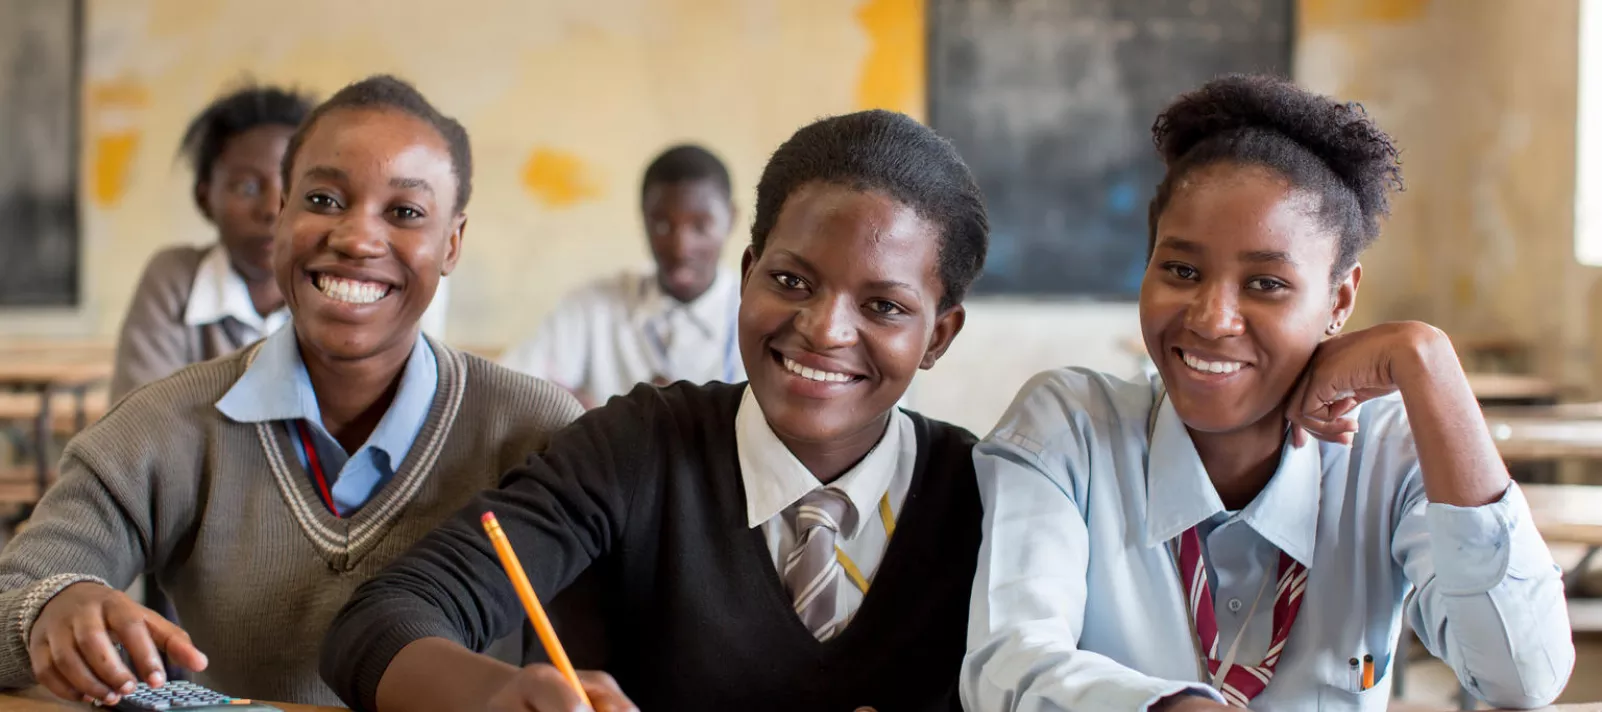 Adolescent girls, including one taking notes, smile during a class